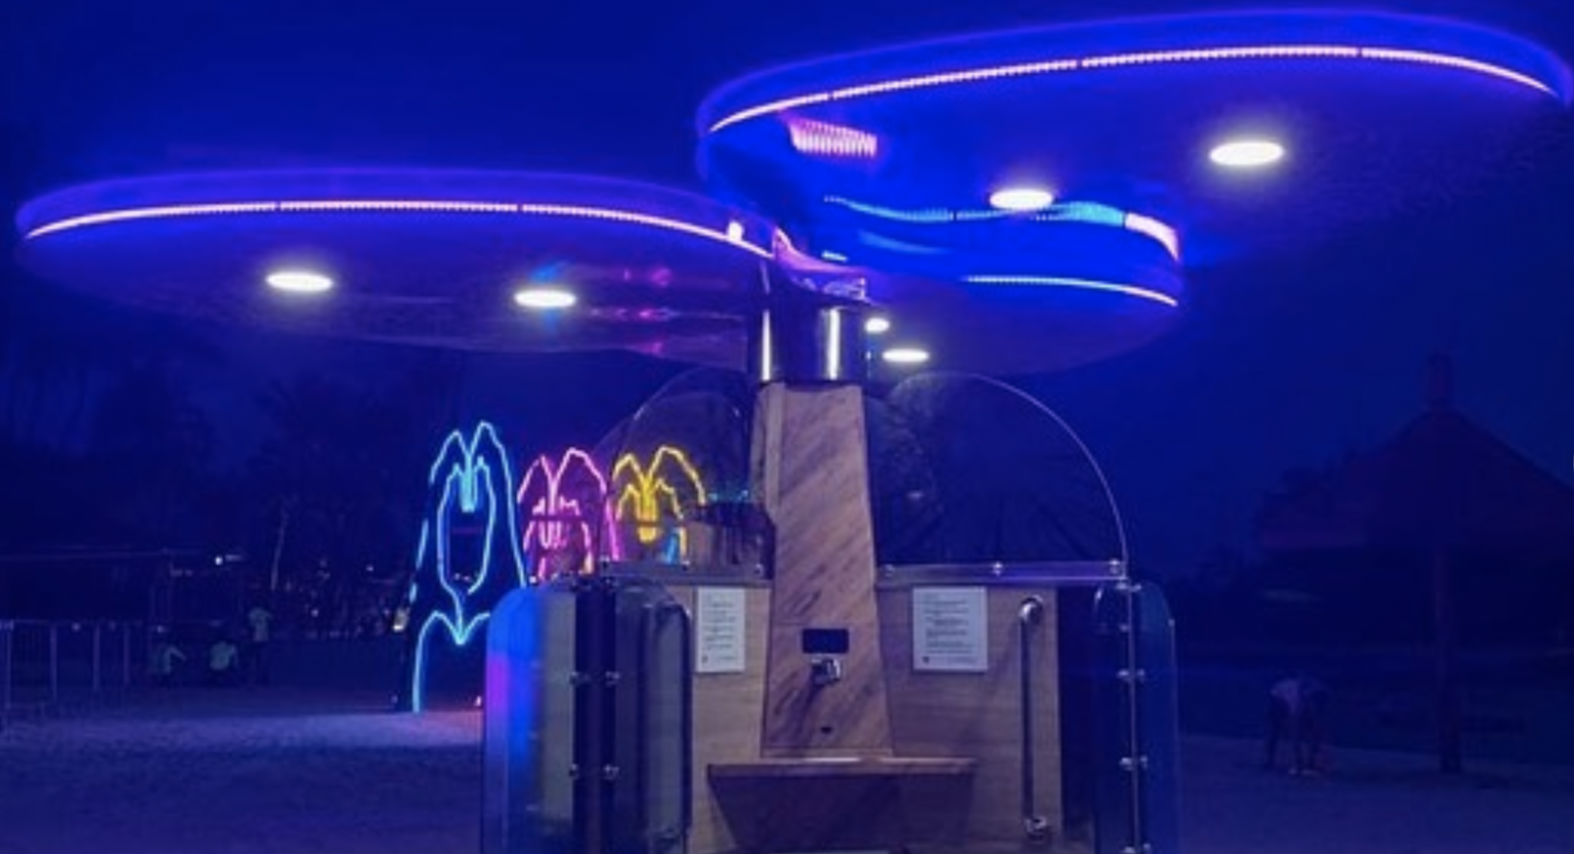 The No Fry Zone kiosk when it lights up at night. (Photo: Instagram/@nofryzonesss)